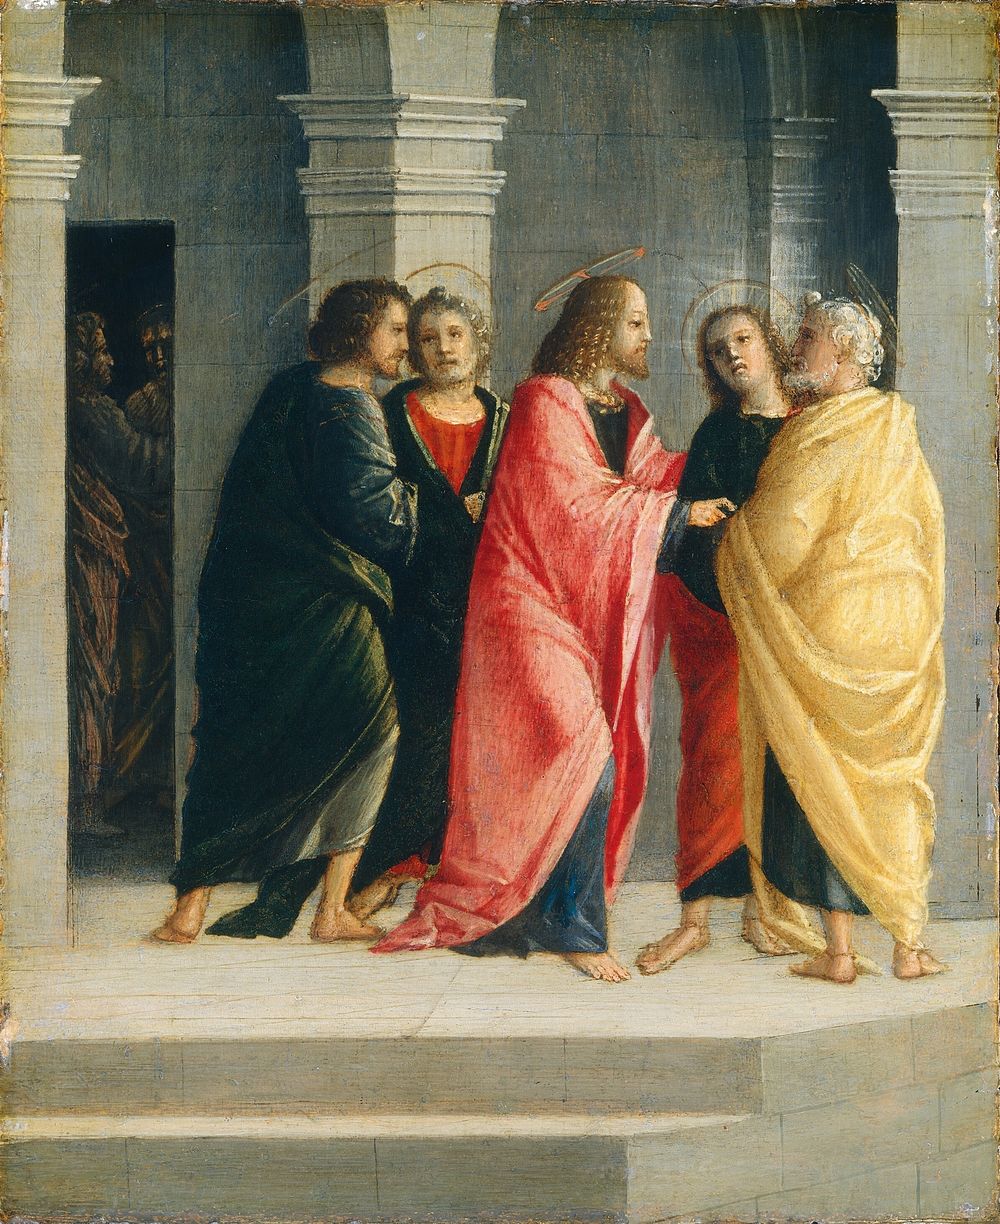 Christ Instructing Peter and John to Prepare for the Passover (1504) by Vincenzo Civerchio.  